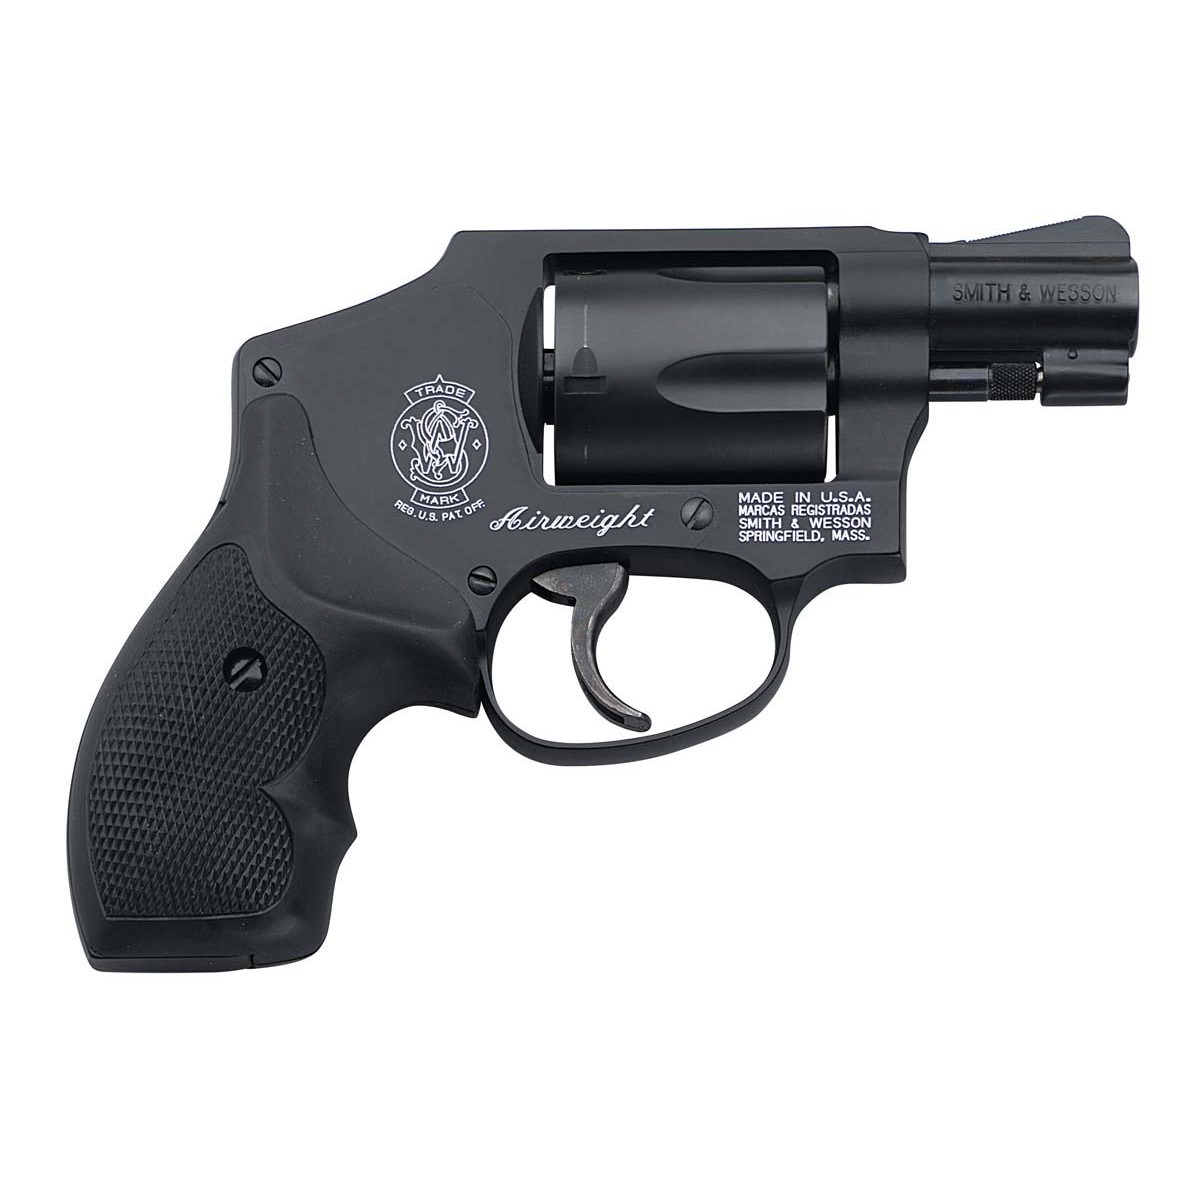 Smith and wesson model 442 for sale